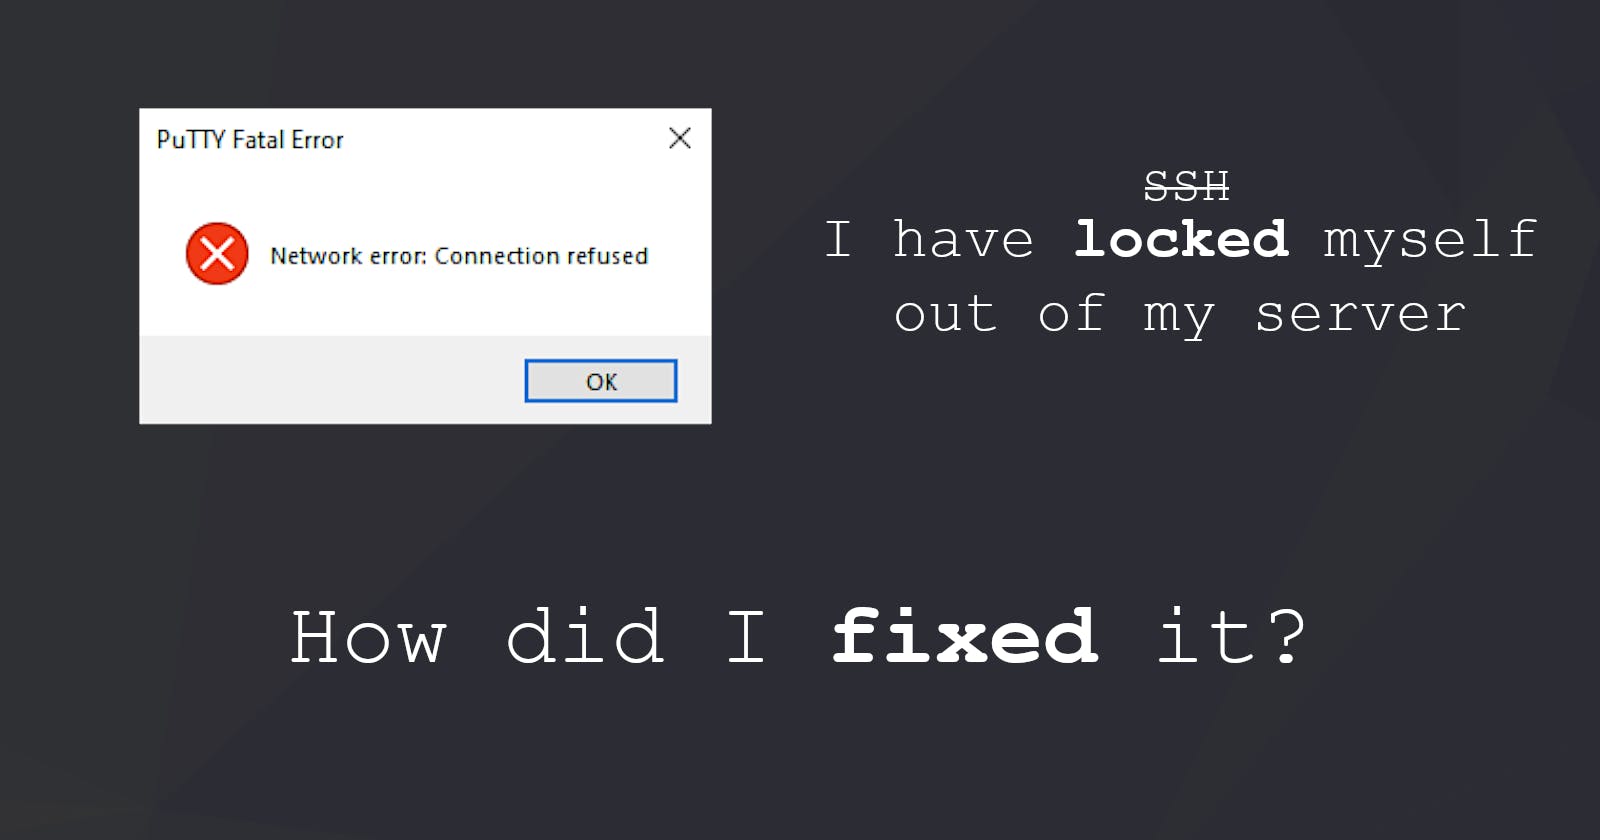 How did I lock myself out of my server, and how did I fix it?